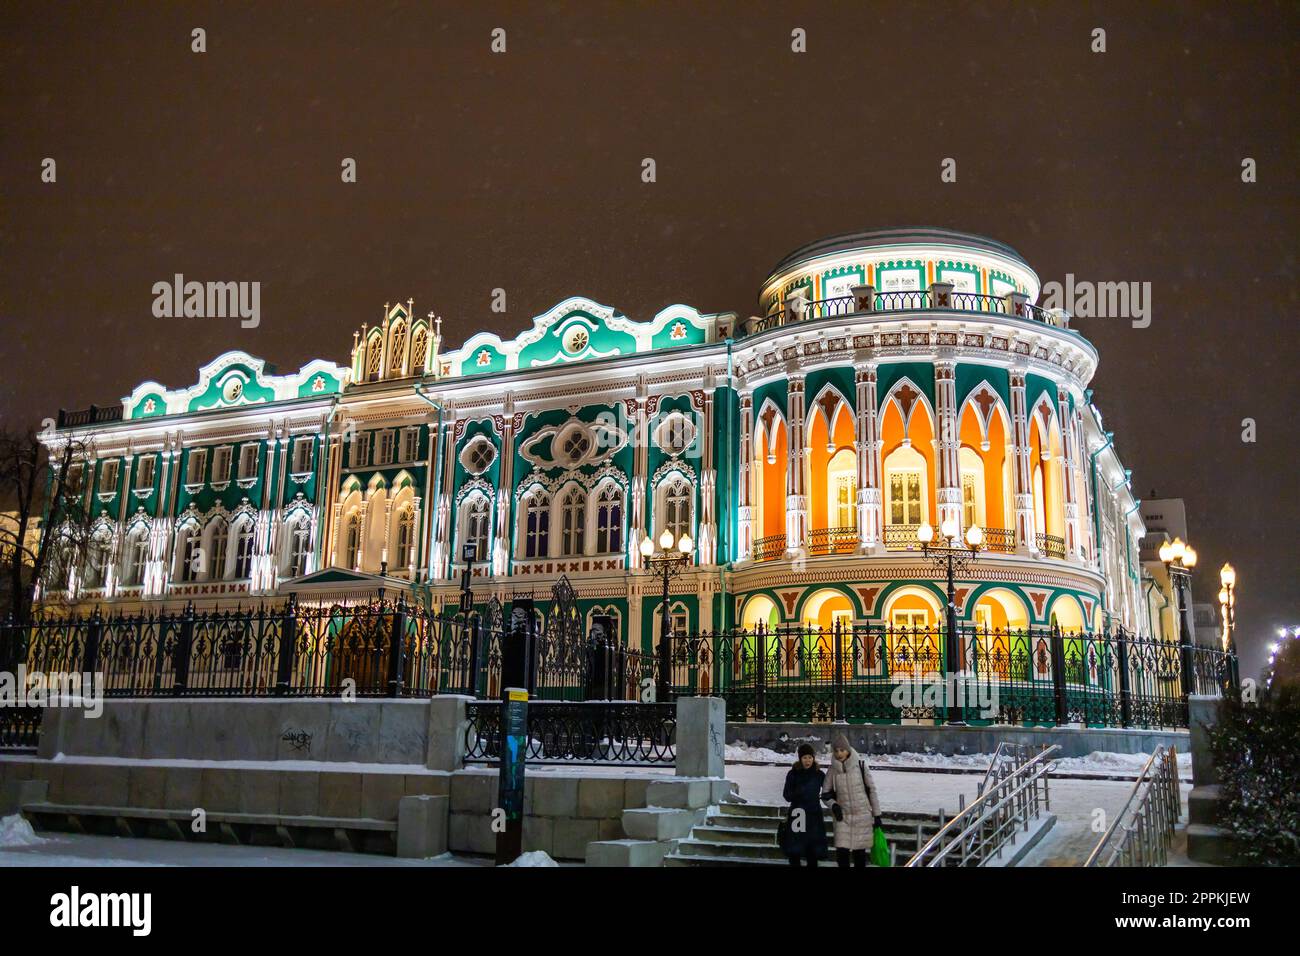 YEKATERINBURG, December 18, 2021: Sevastyanov House also House of Trade Unions in Yekaterinburg in Russia at night and winter season. Its a palace built in the first quarter of XIX century on the banks of the city pond, formed by a dam on the Iset River. Stock Photo